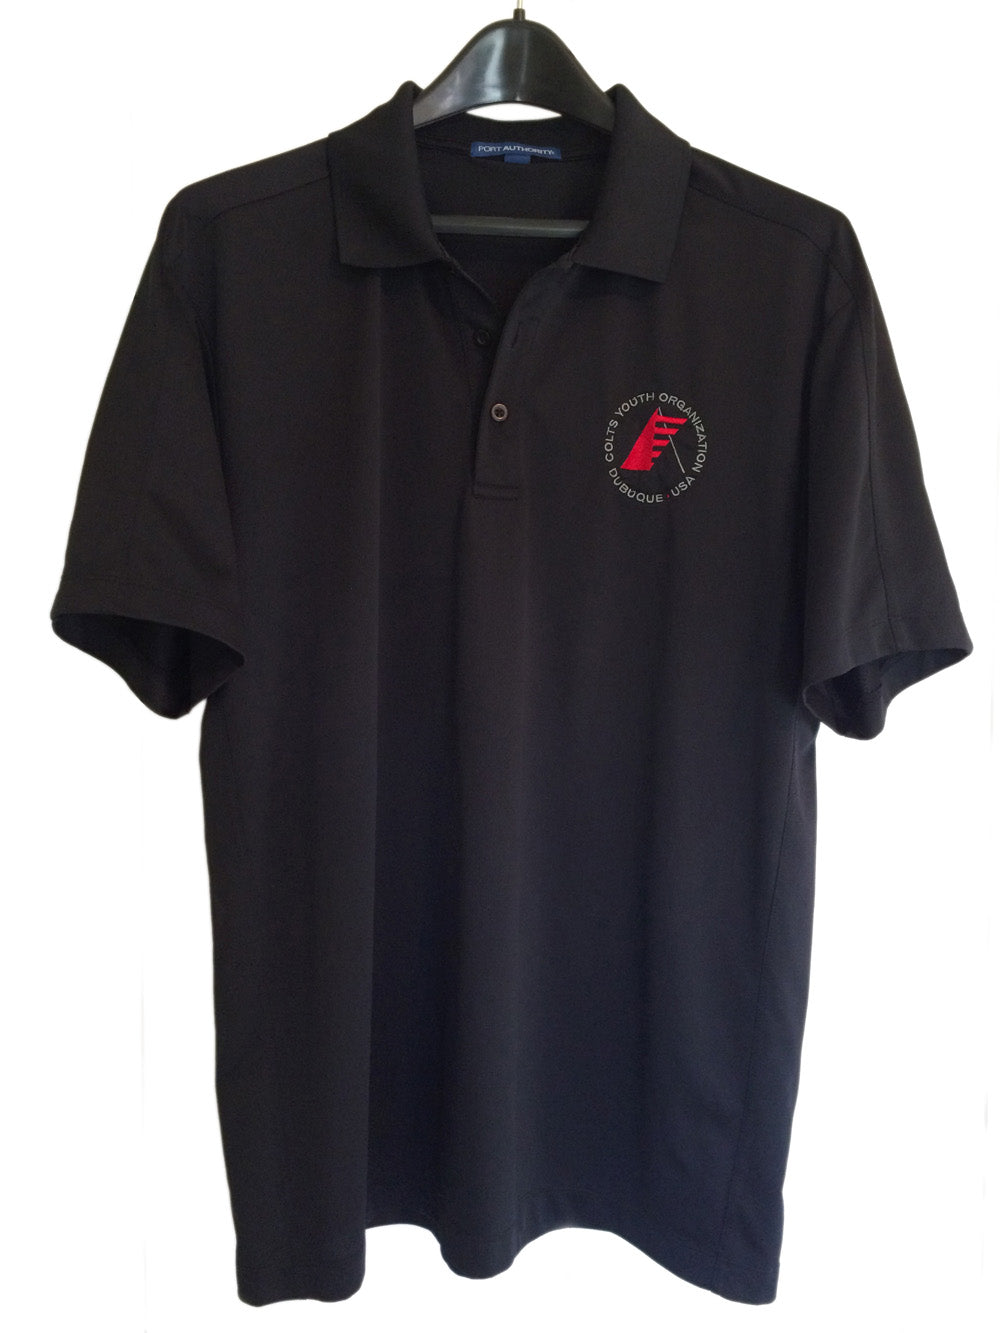 Colts Youth Organization Polo